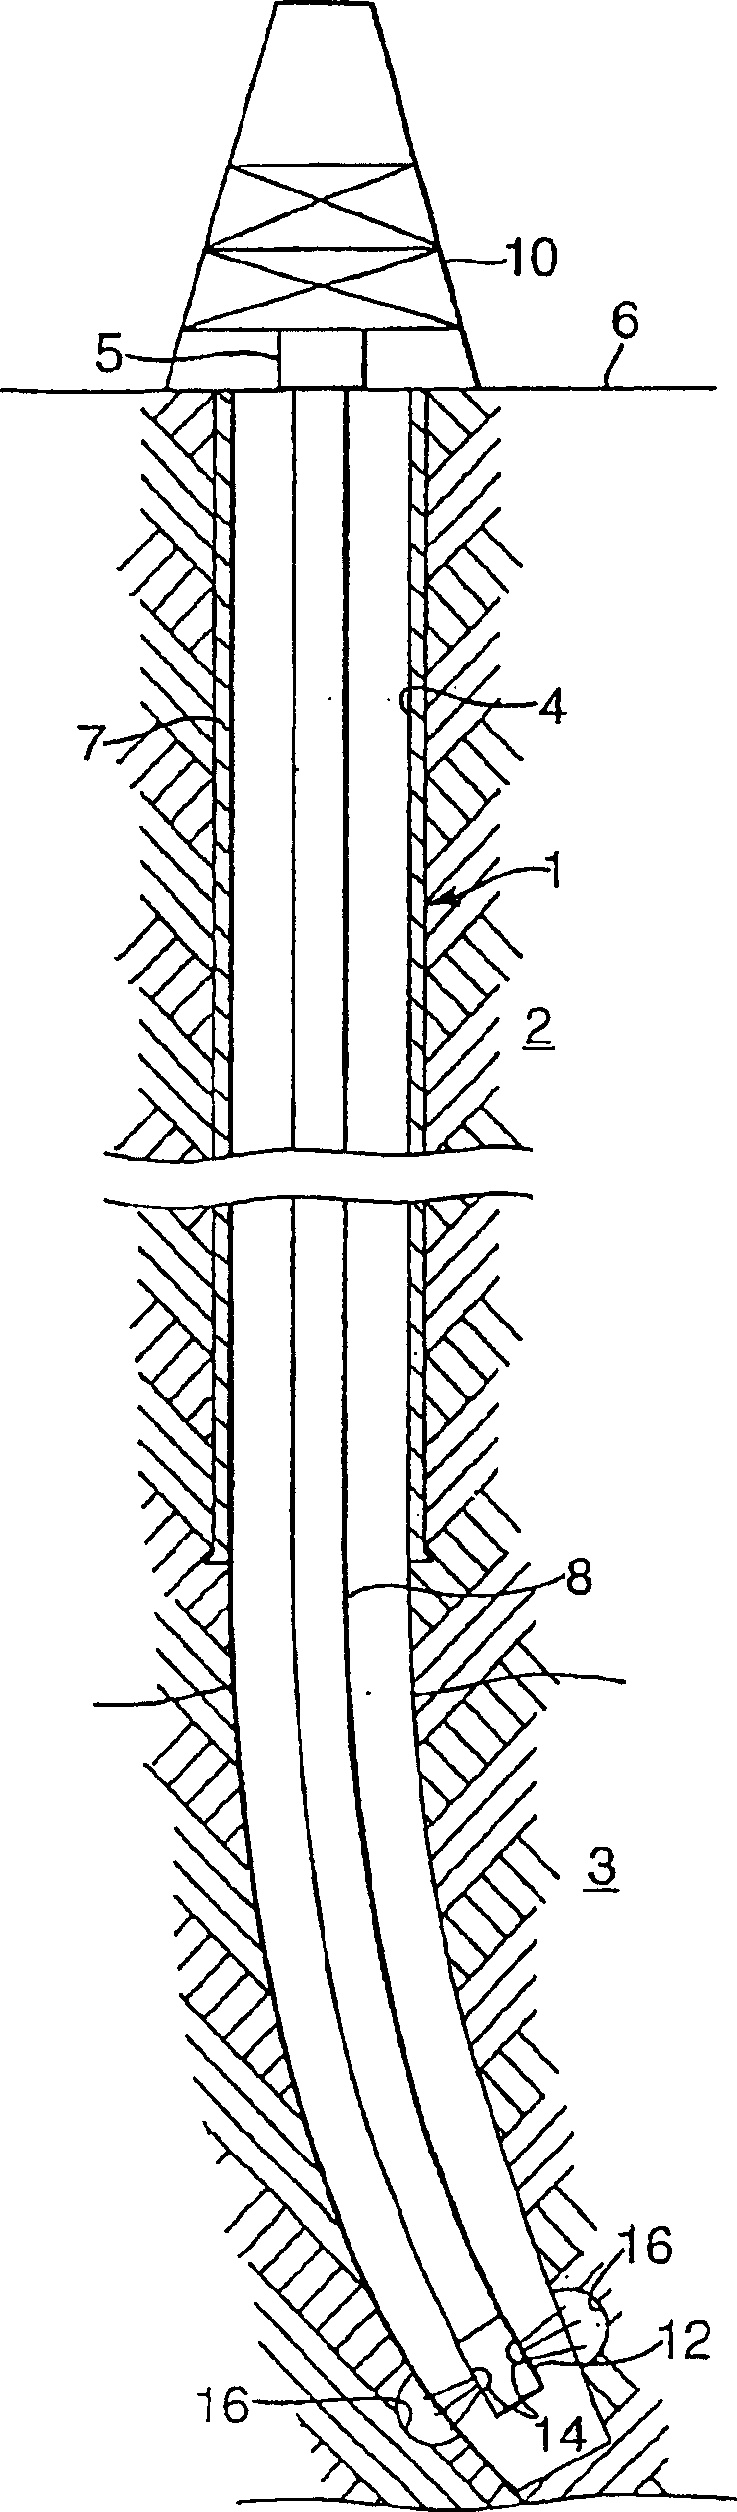 Method of reducing sand production from a wellbore